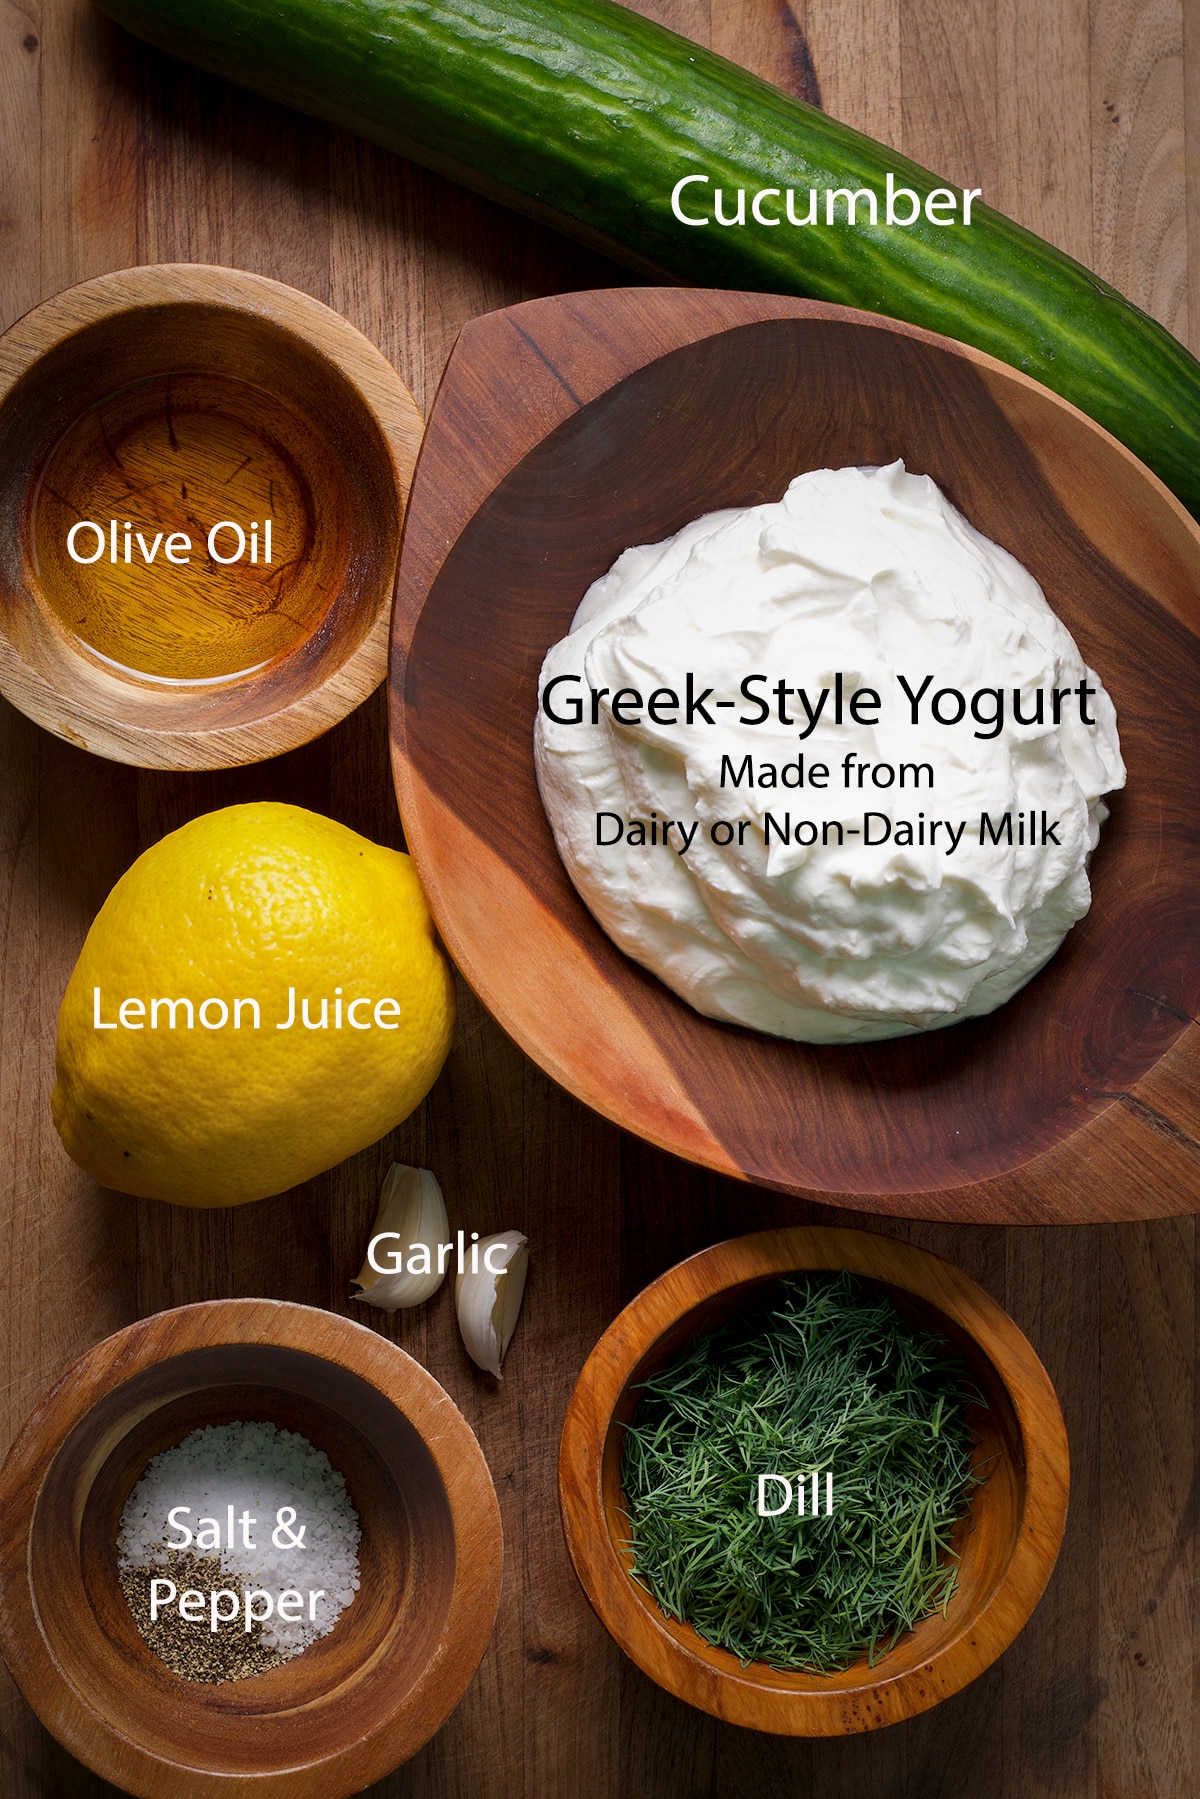 All of the ingredients to make traditional or vegan tzatziki on a wood cutting board.